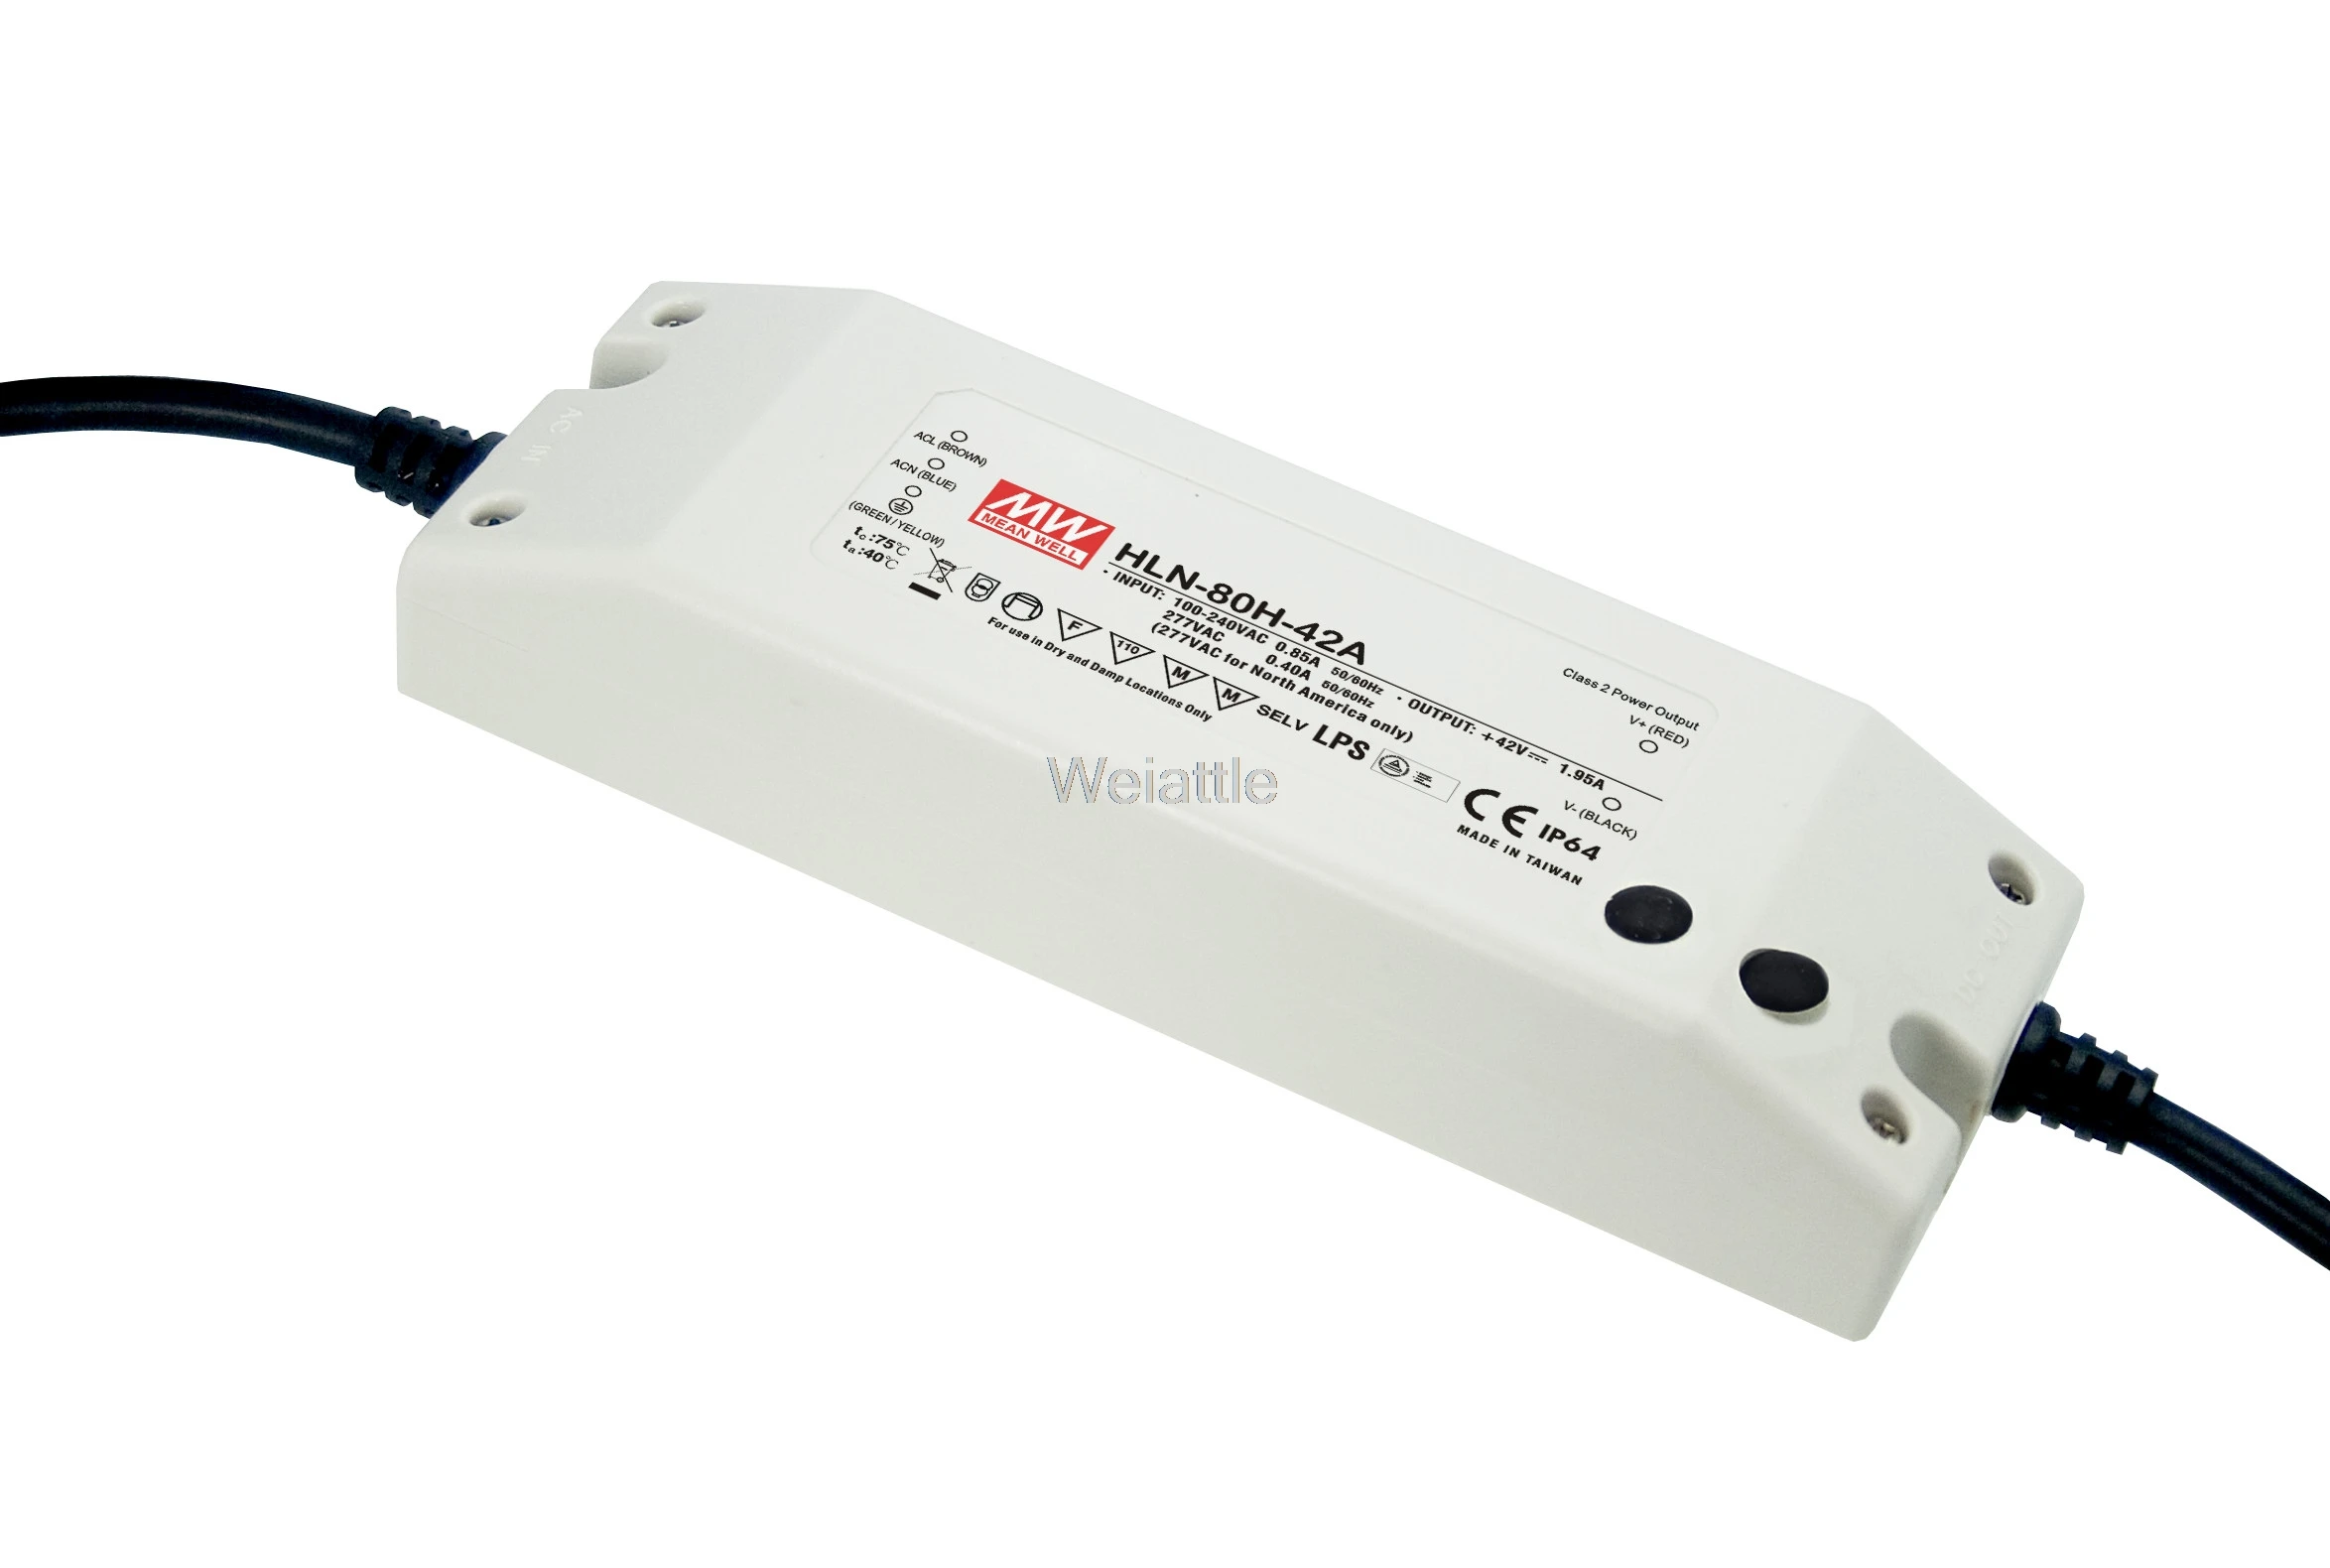 

MEAN WELL original HLN-80H-20A 20V 4A HLN-80H 20V 80W Single Output LED Dimming Driver Power Supply A type Waterproof IP65